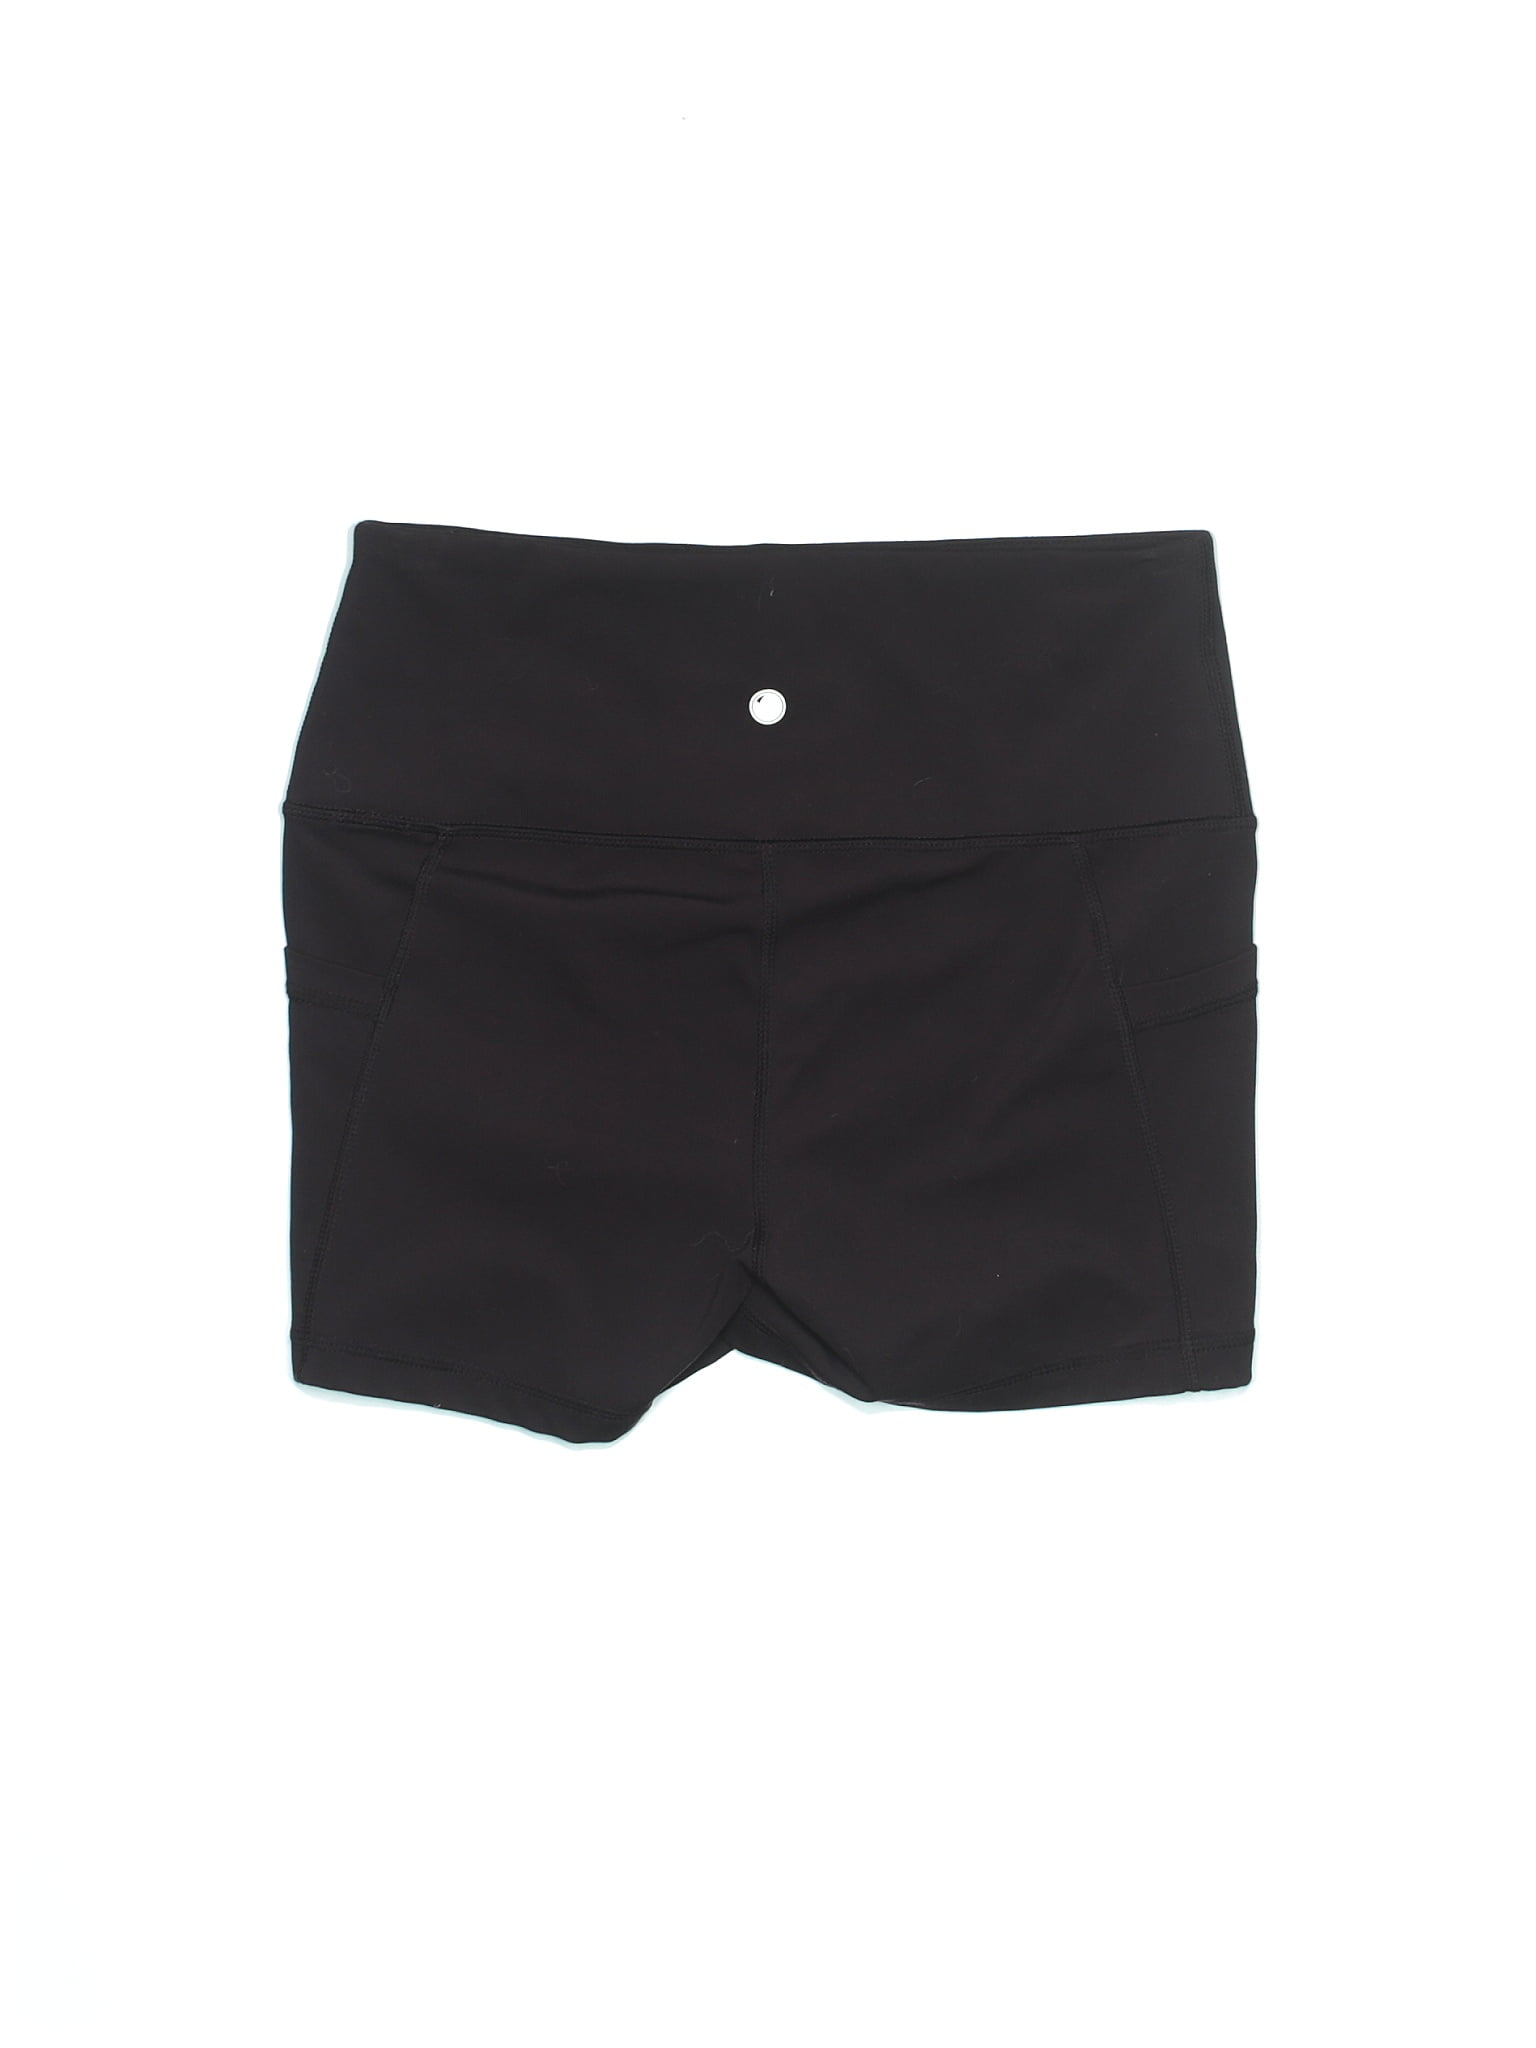 Yogalicious Pull On Athletic Shorts for Women